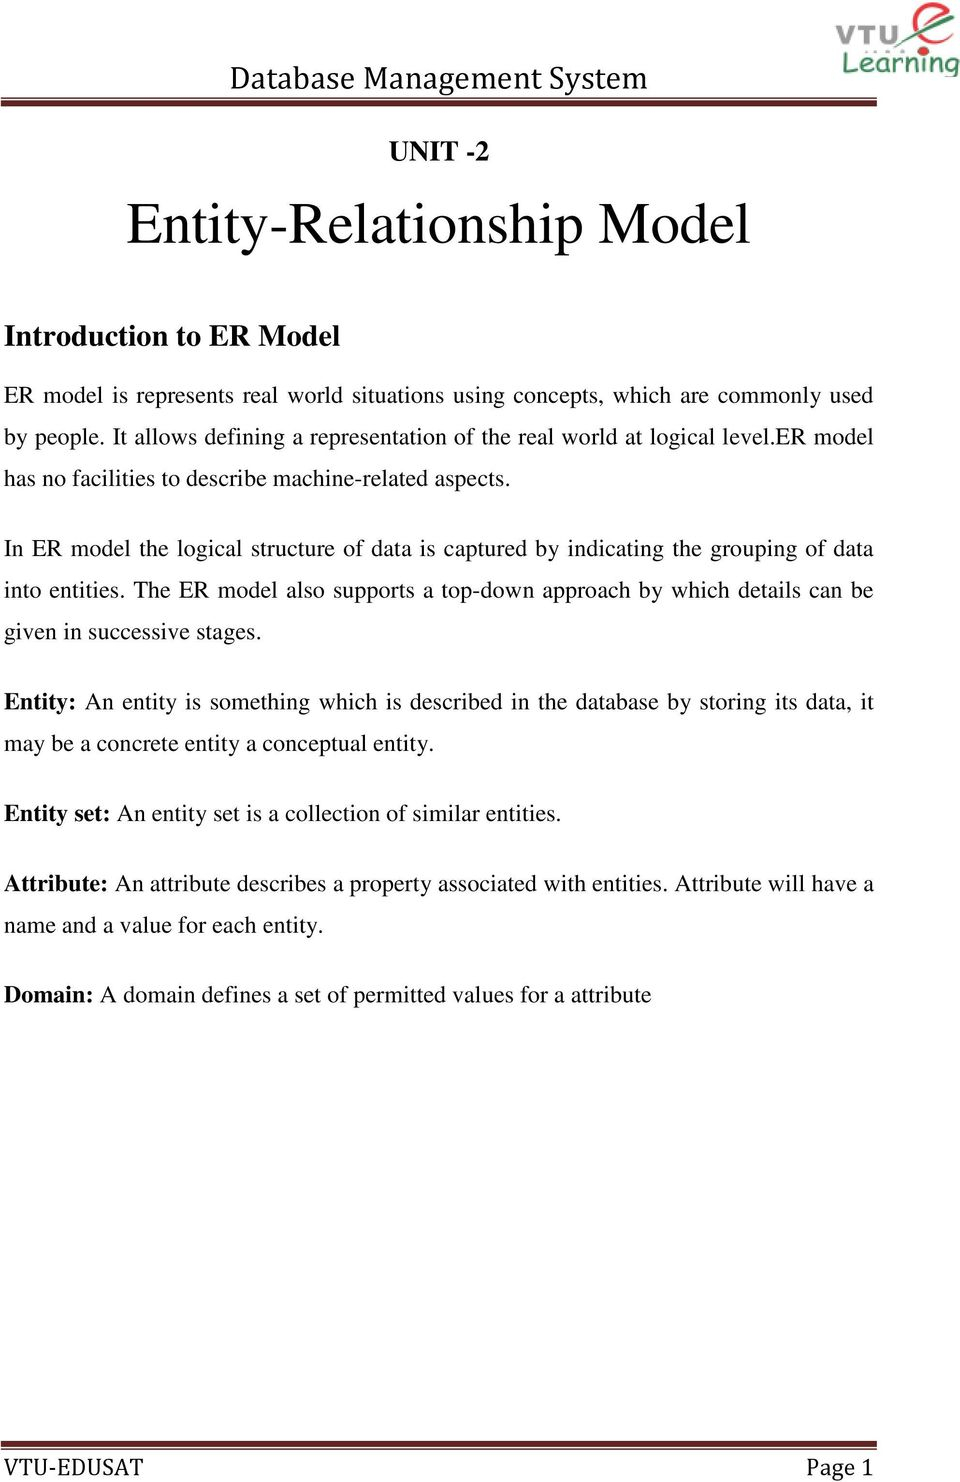 Entity-Relationship Model - Pdf pertaining to Introduction To Er Model